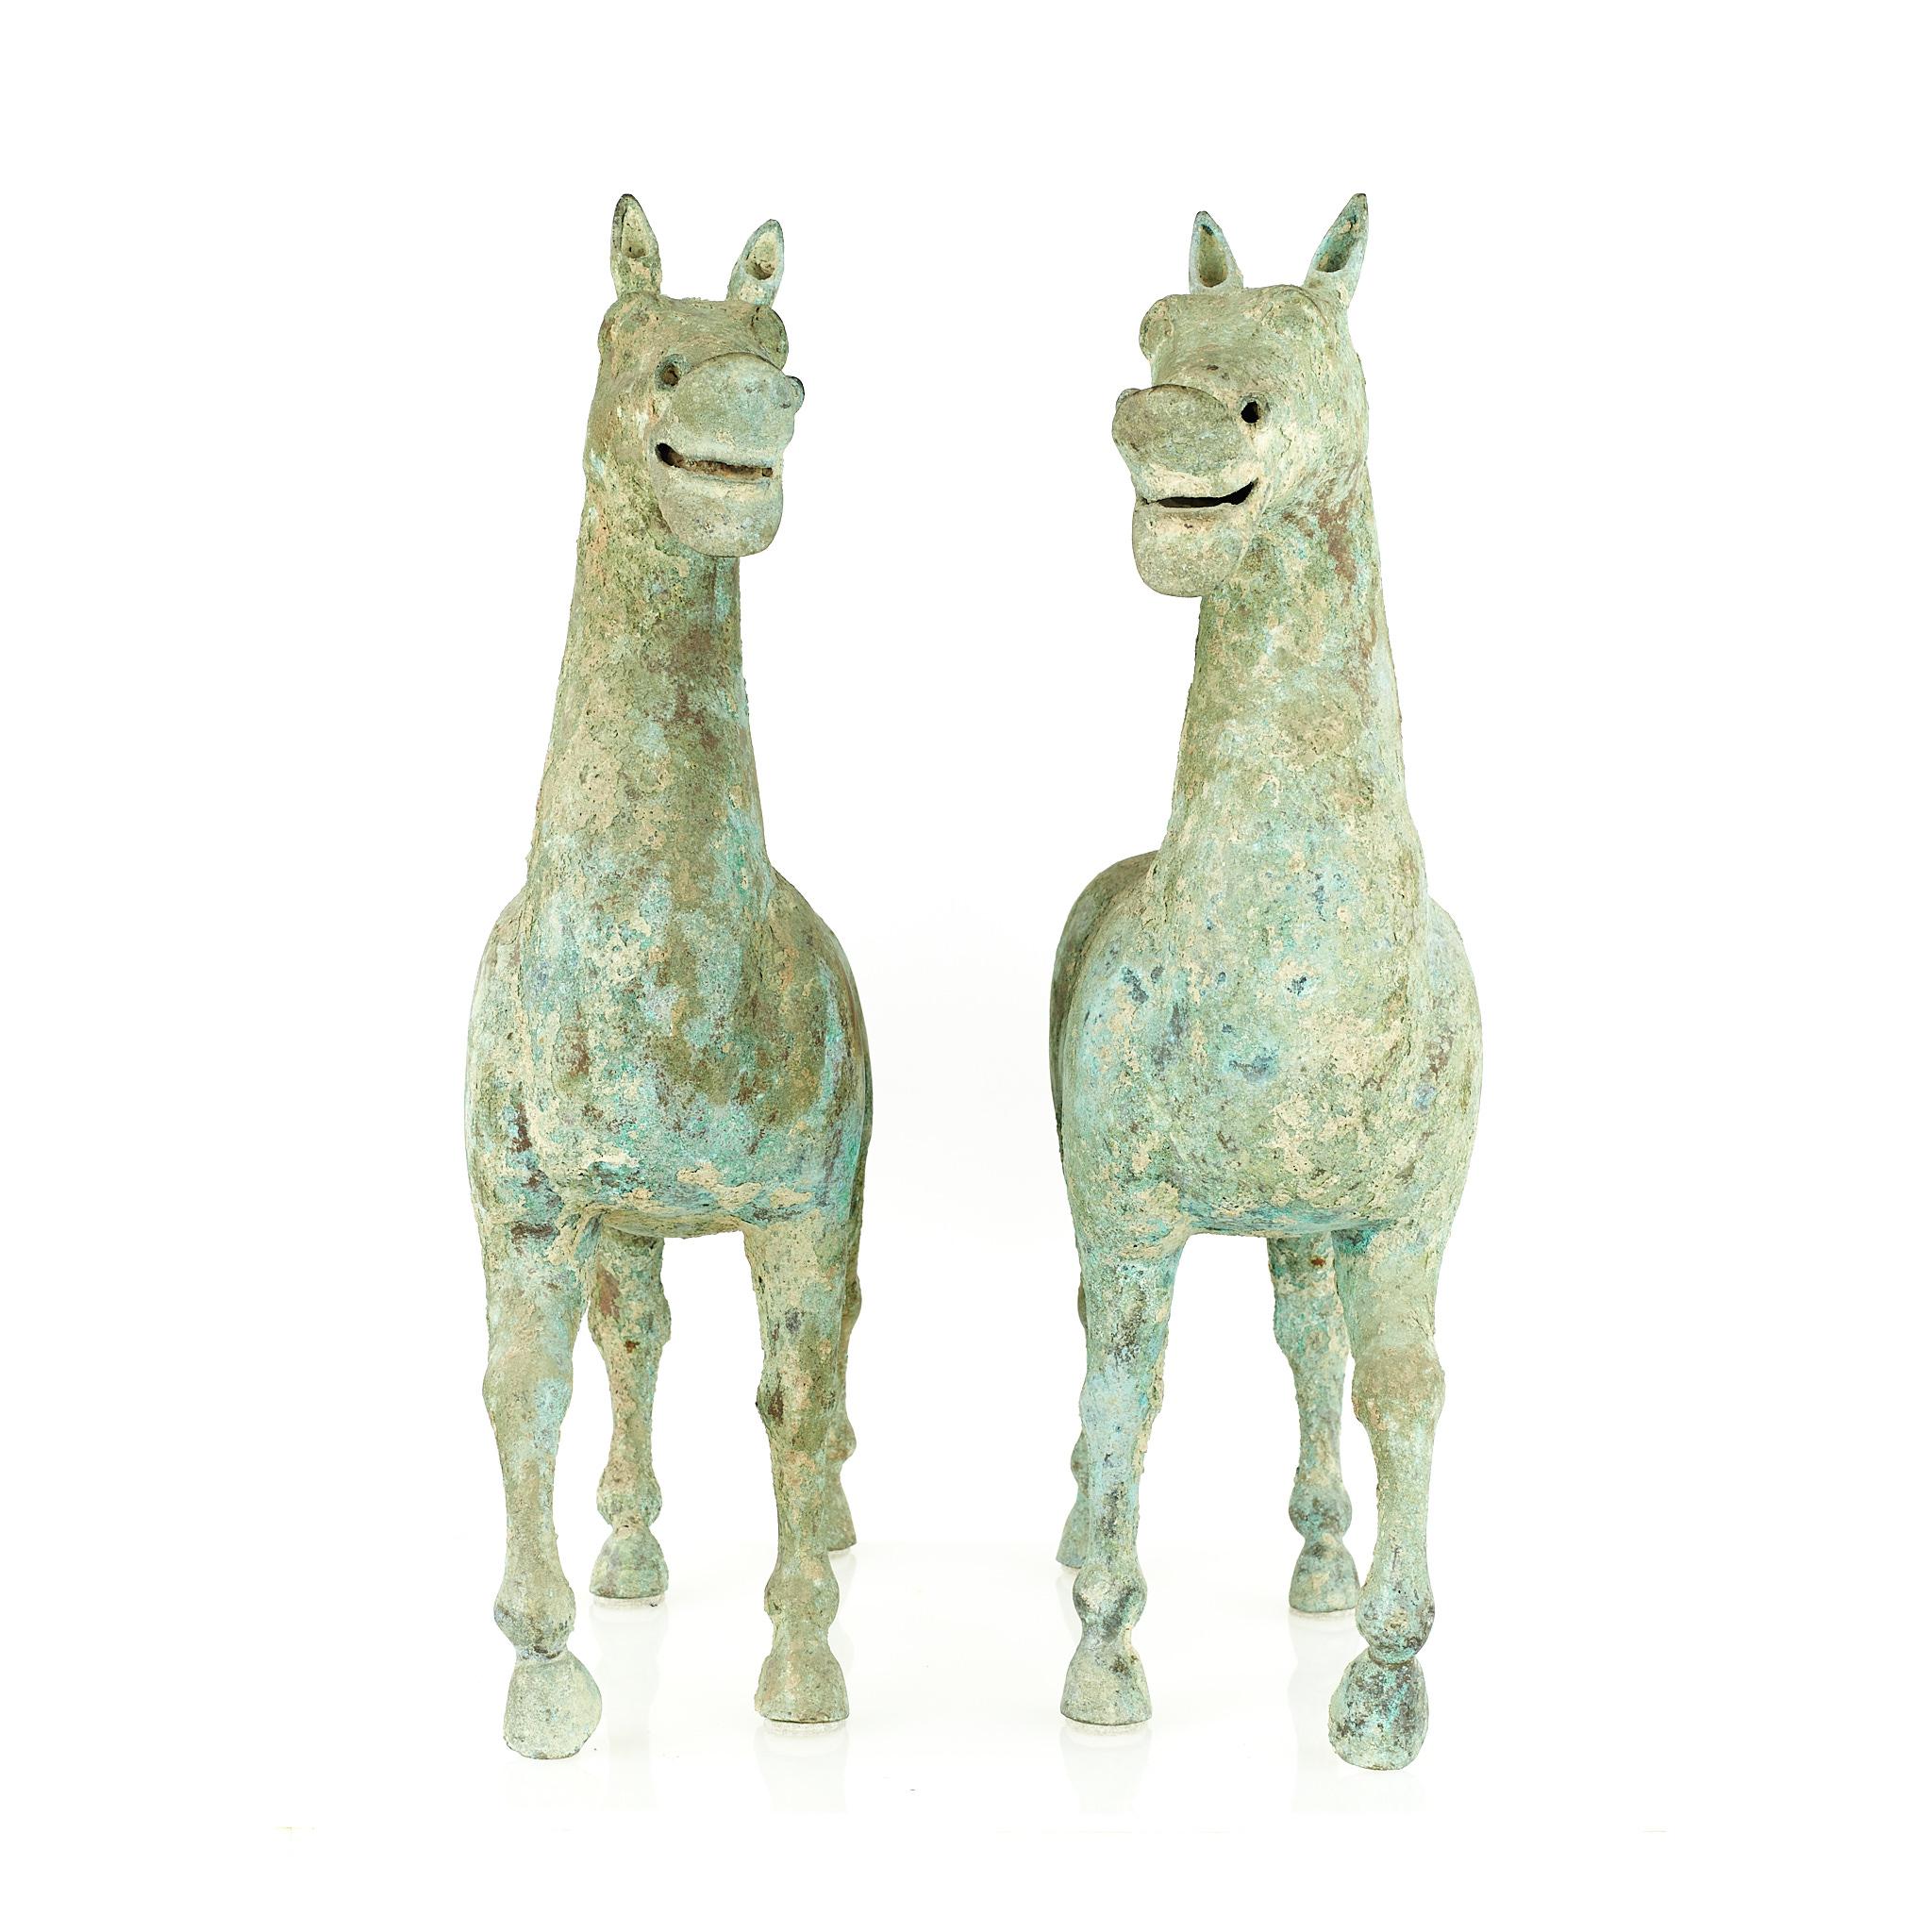 Han Dynasty style mid century Terracotta Horse - pair

Each figurine measures: 7 wide x 23 deep x 24 inches high

We take our photos in a controlled lighting studio to show as much detail as possible. We do not photoshop out blemishes. 

We